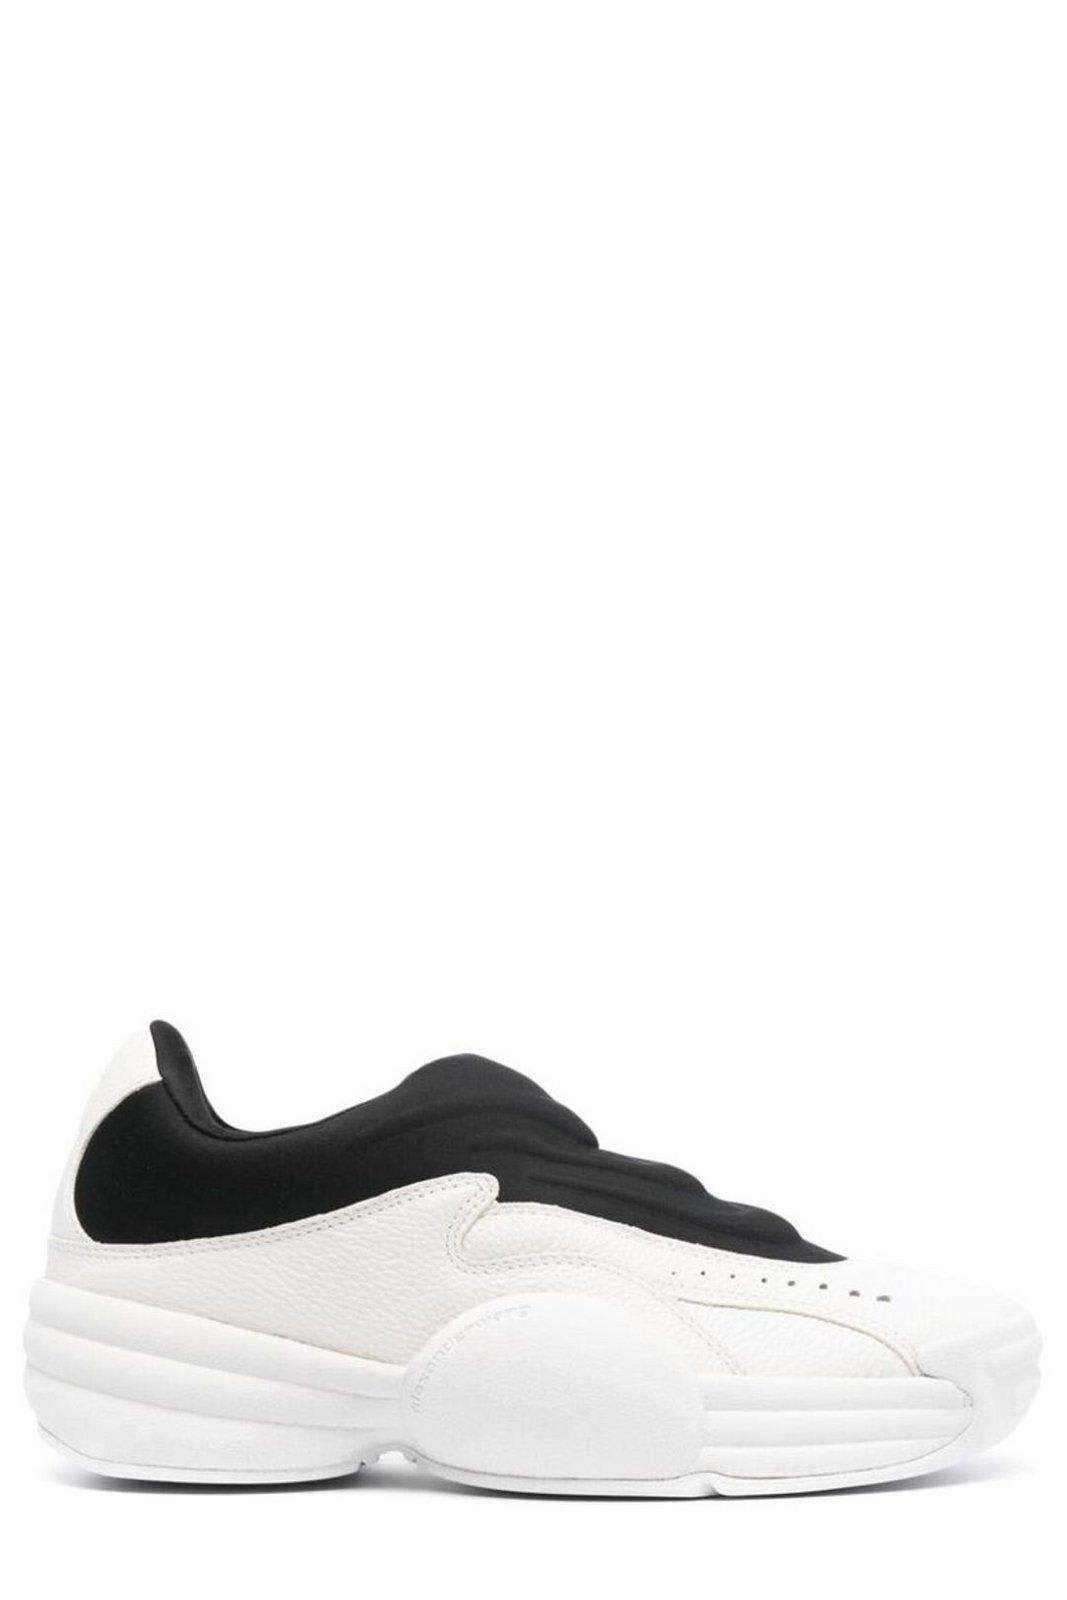 Alexander Wang Lace-up Sneakers